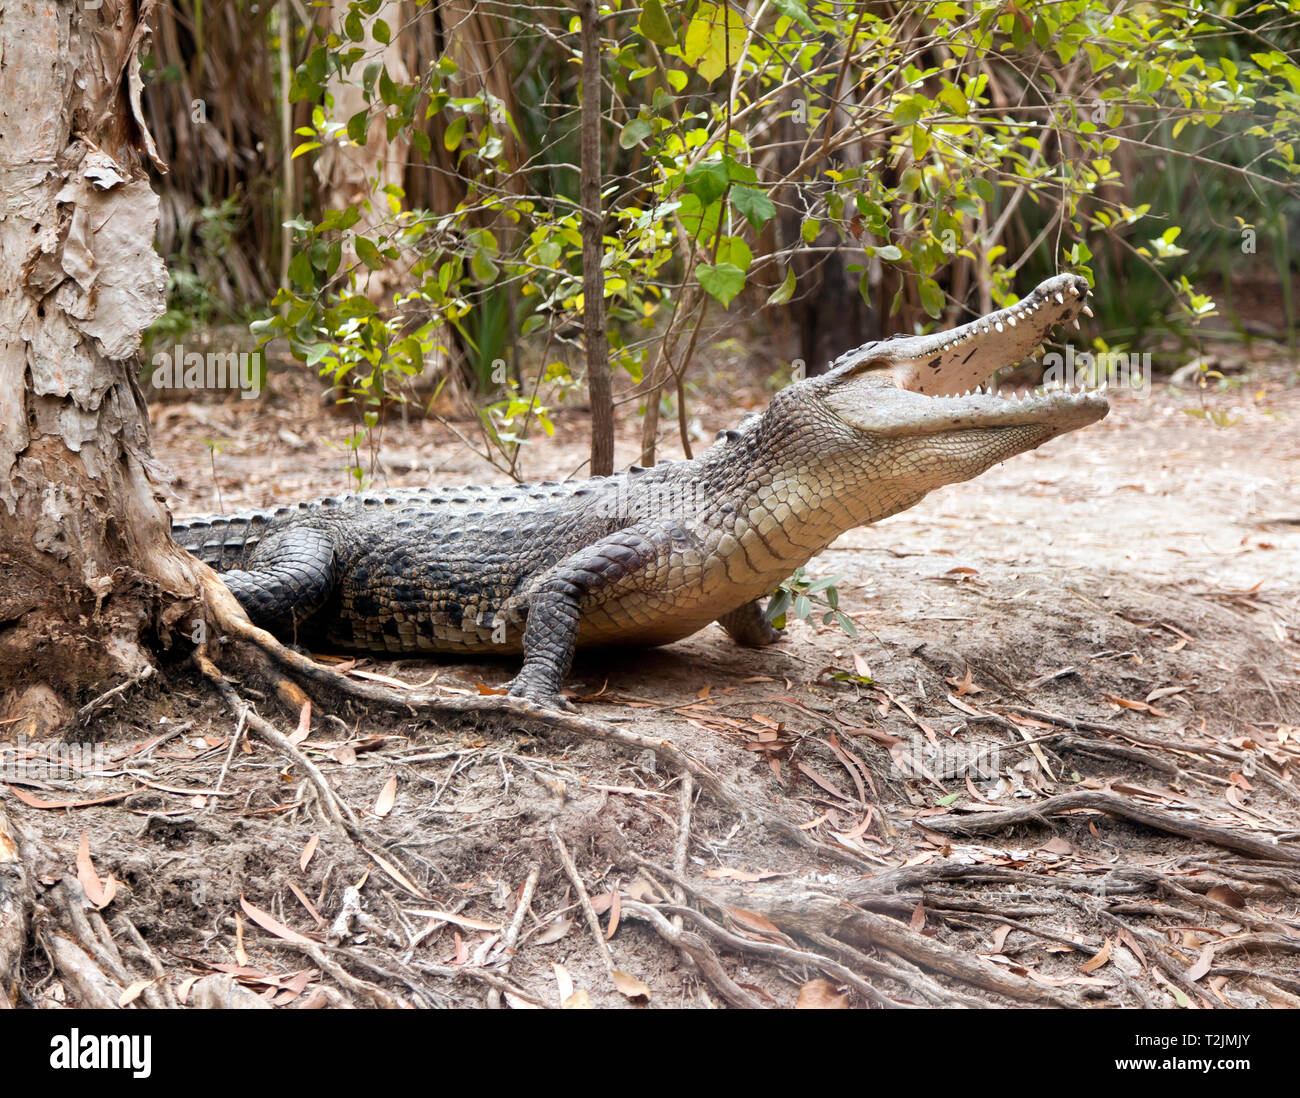 View of a  large Crocodile  at Hartley's Crocodile Adventures, Captain Cook Highway, Wangetti, Queensland, Australia. Stock Photo